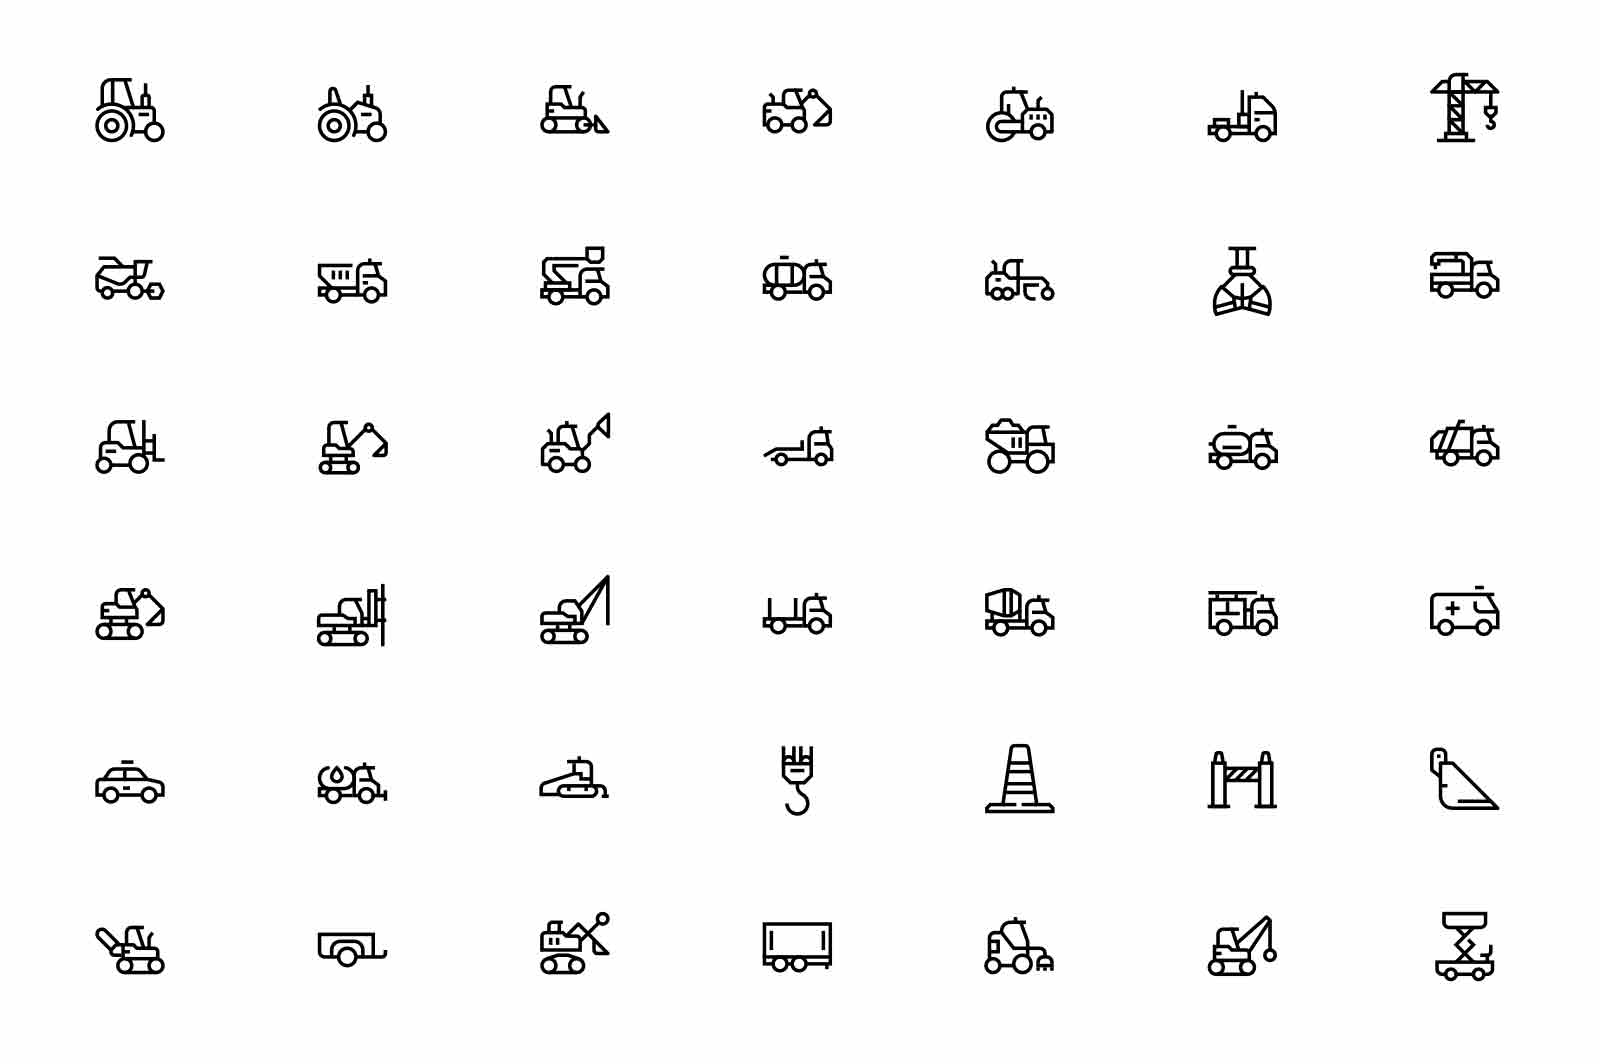 Heavy equipment construction machines icons set vector illustration. Building transport line icon. Industrial vehicle and machinery concept